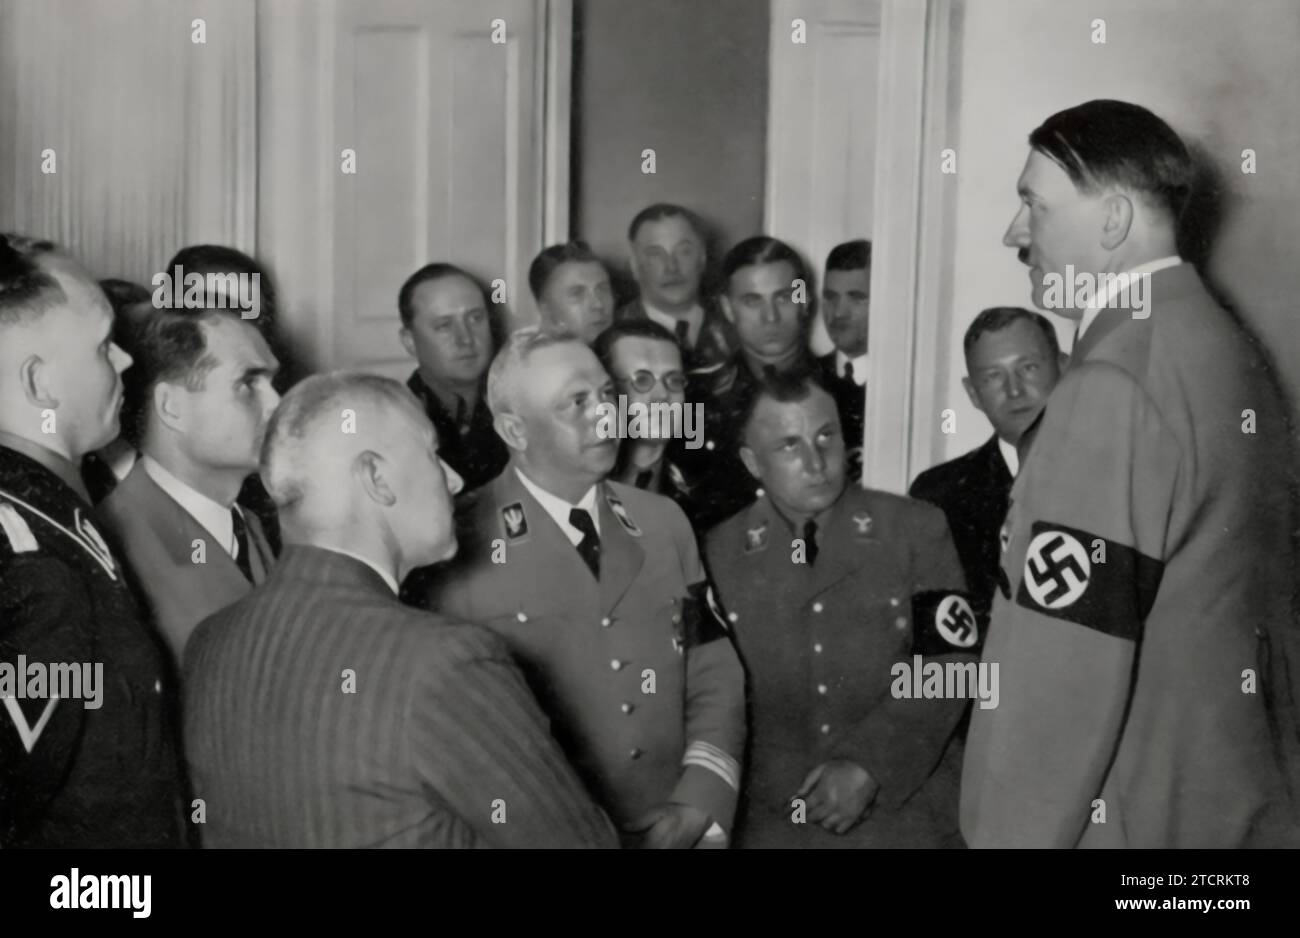 On the evening of the Reichstag elections on March 29, 1936, Adolf Hitler is seen surrounded by his closest associates. This moment captures the consolidation of power following a significant electoral event for the Nazi regime. The gathering of these key figures around Hitler, following a day marked by political maneuvering and propaganda, reflects the regime's strategy of unity and the central role of Hitler in orchestrating and leading these efforts. Stock Photo